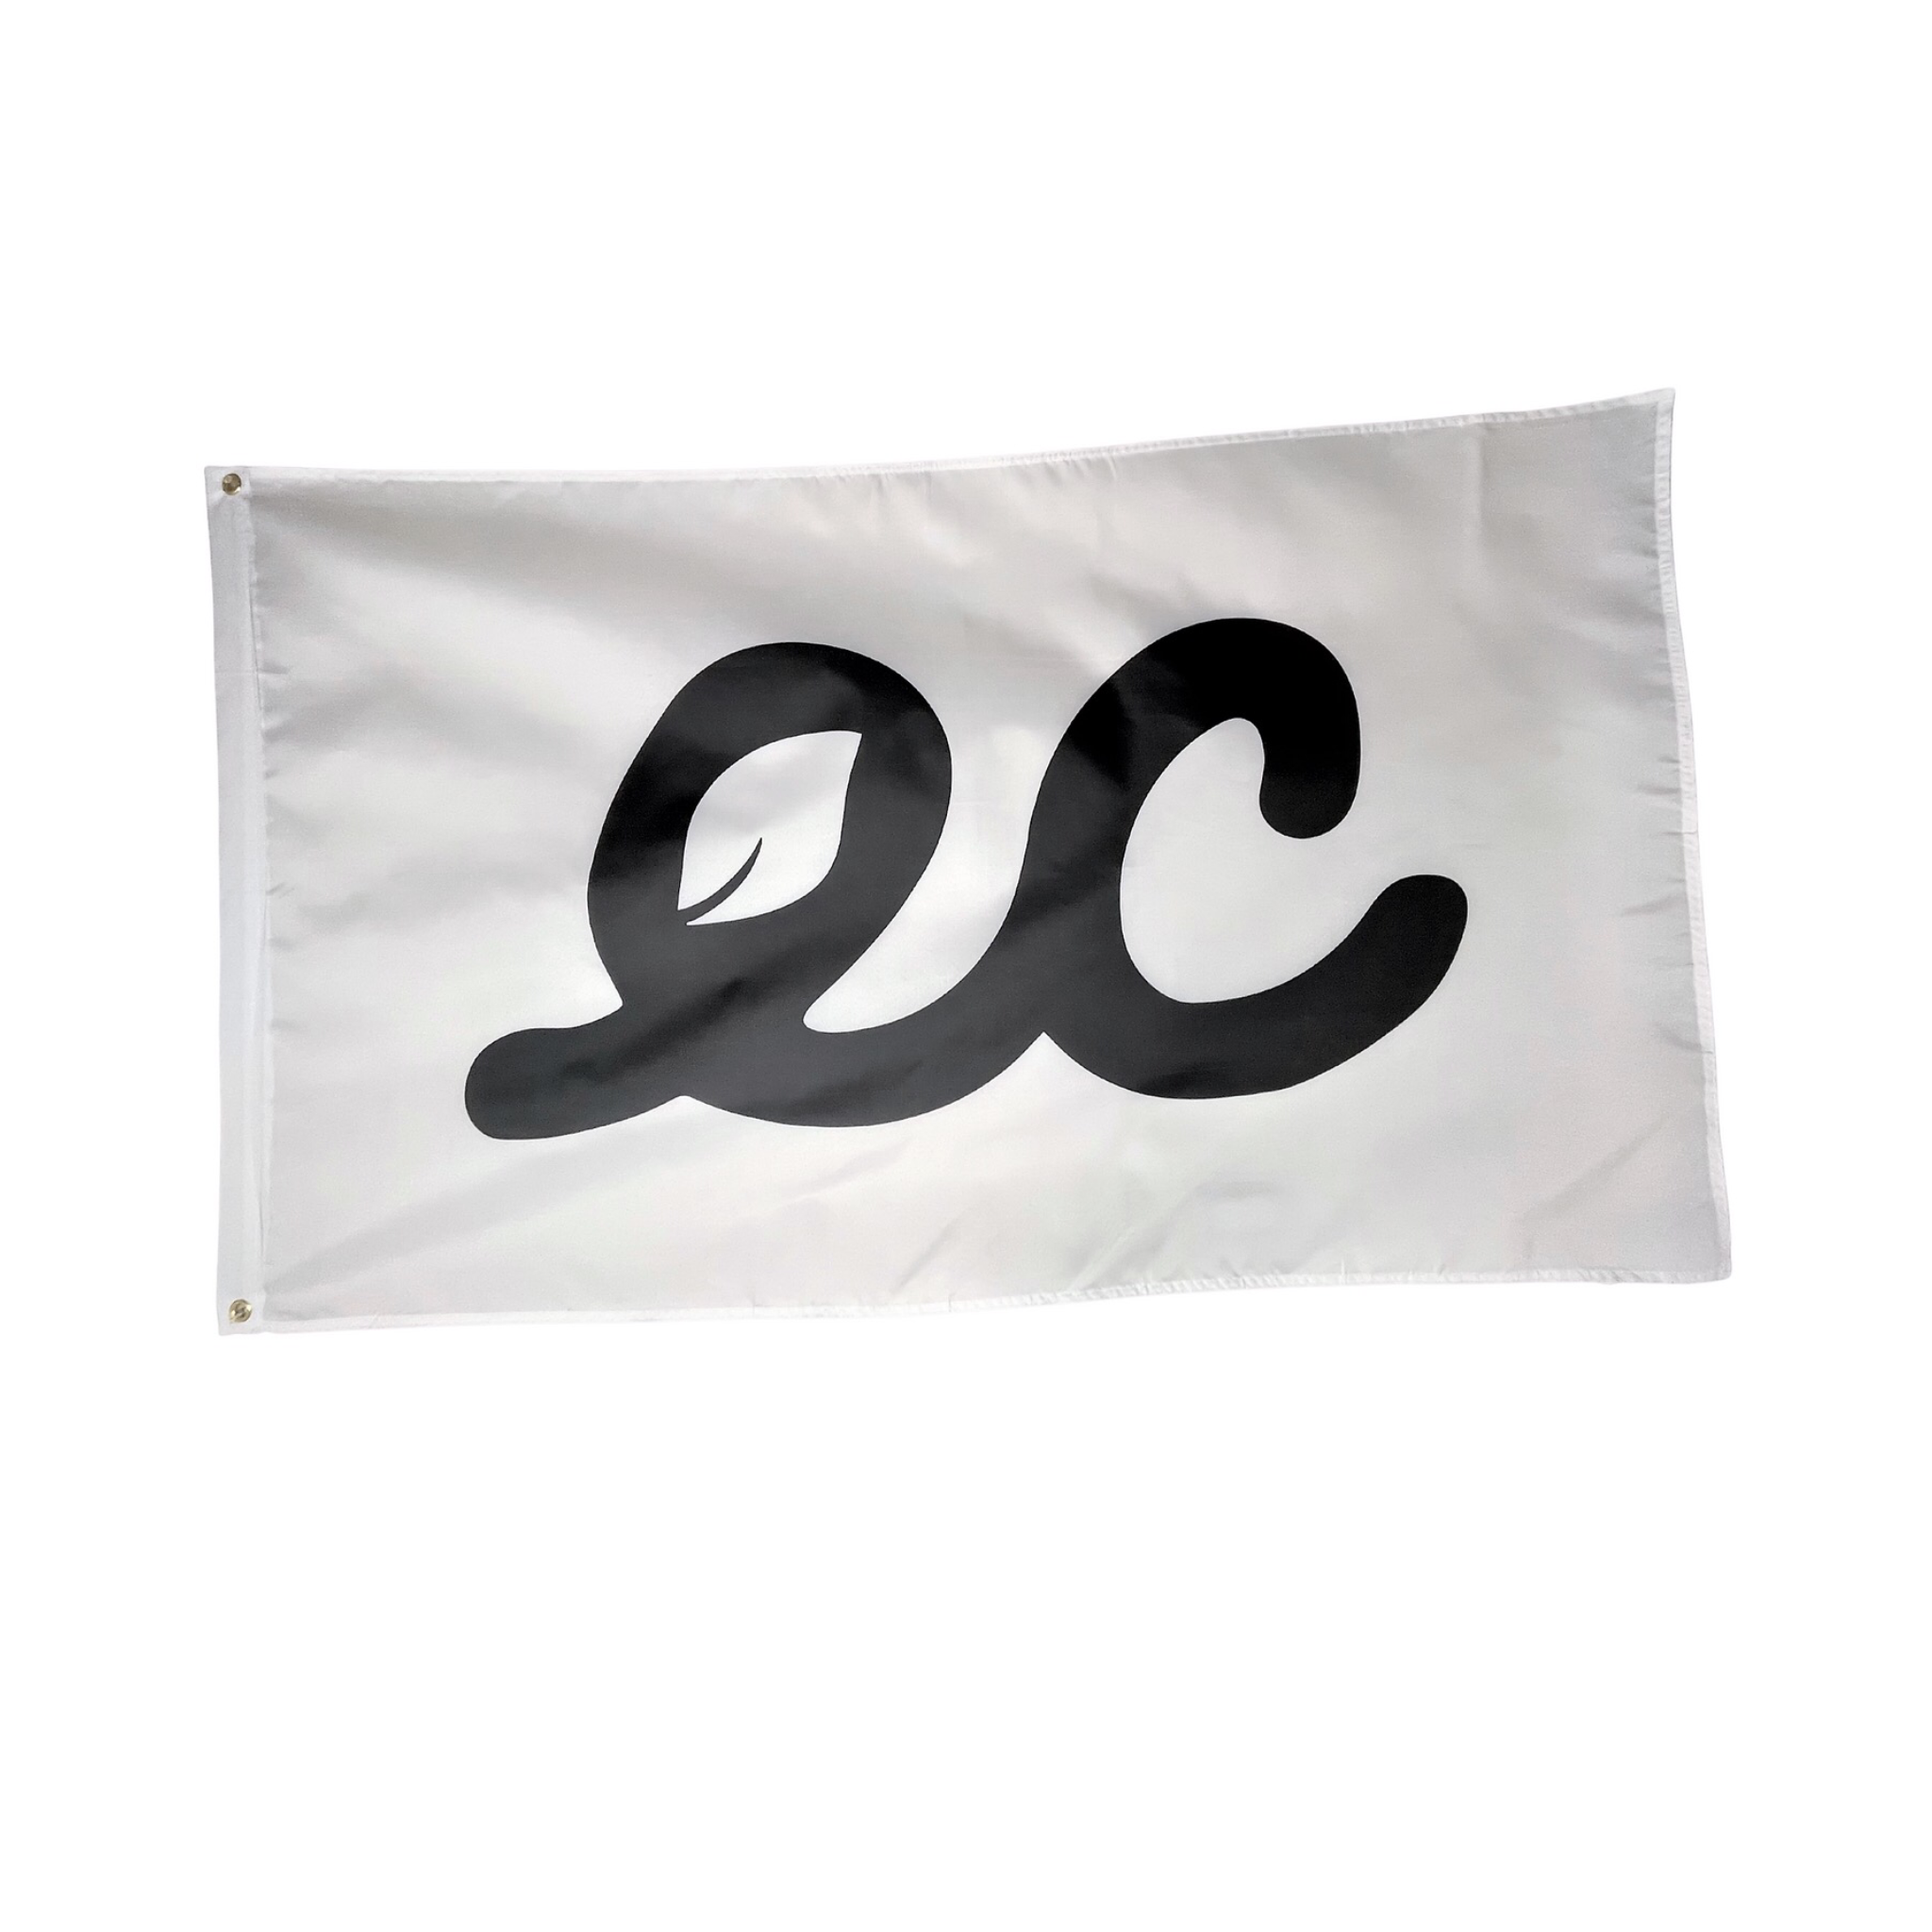 Earth brands - Earth Flags - Eco-friendly Flags - Flag - Eco-friendly prints Flags